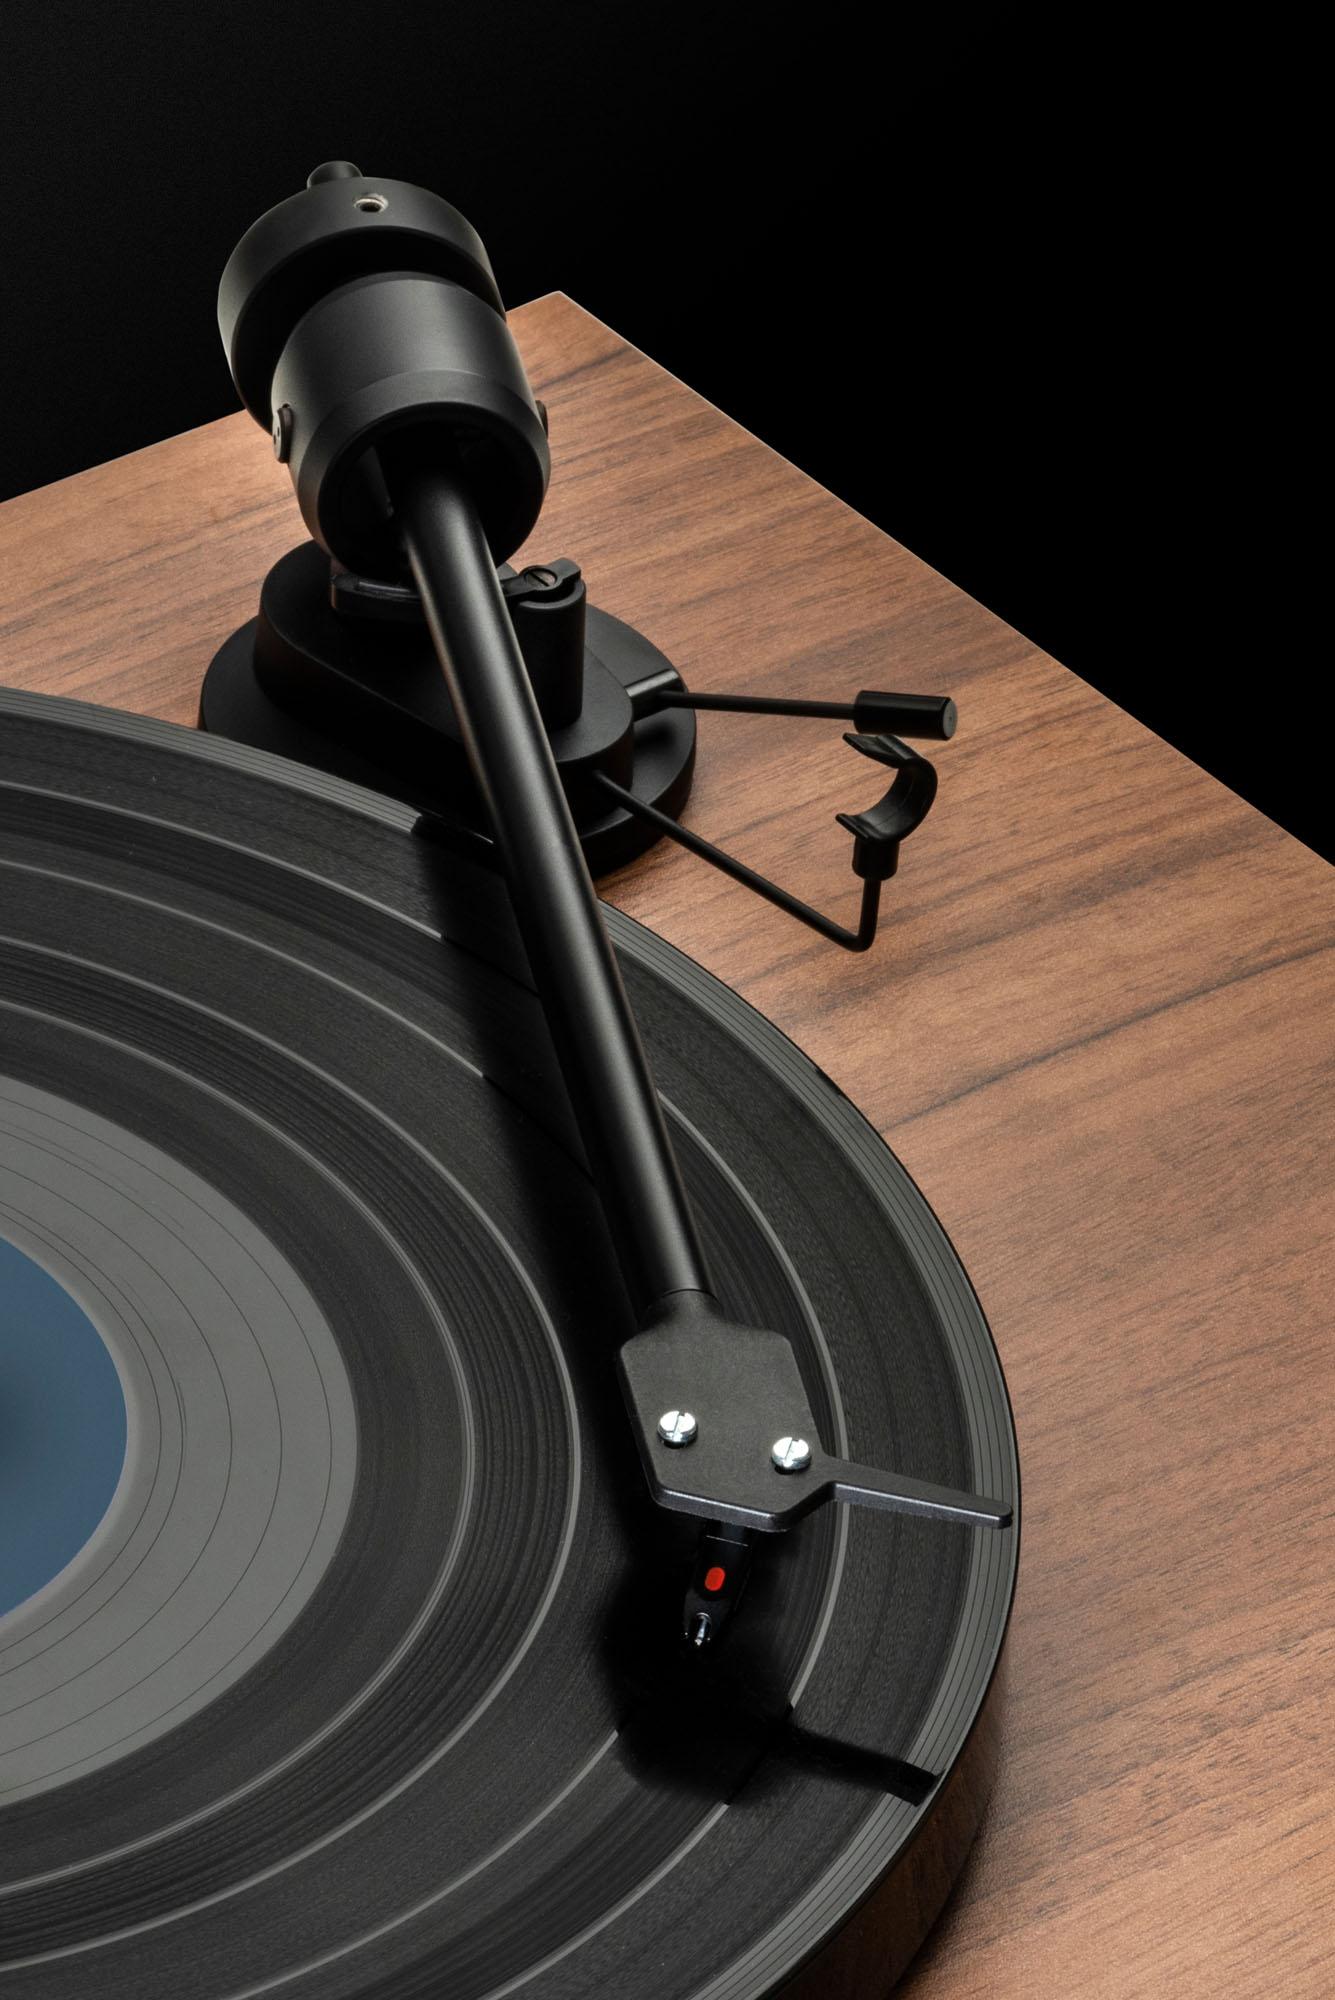 Audiophile quality, entry-level prices define this new series d5b631af e1 playing vinyl